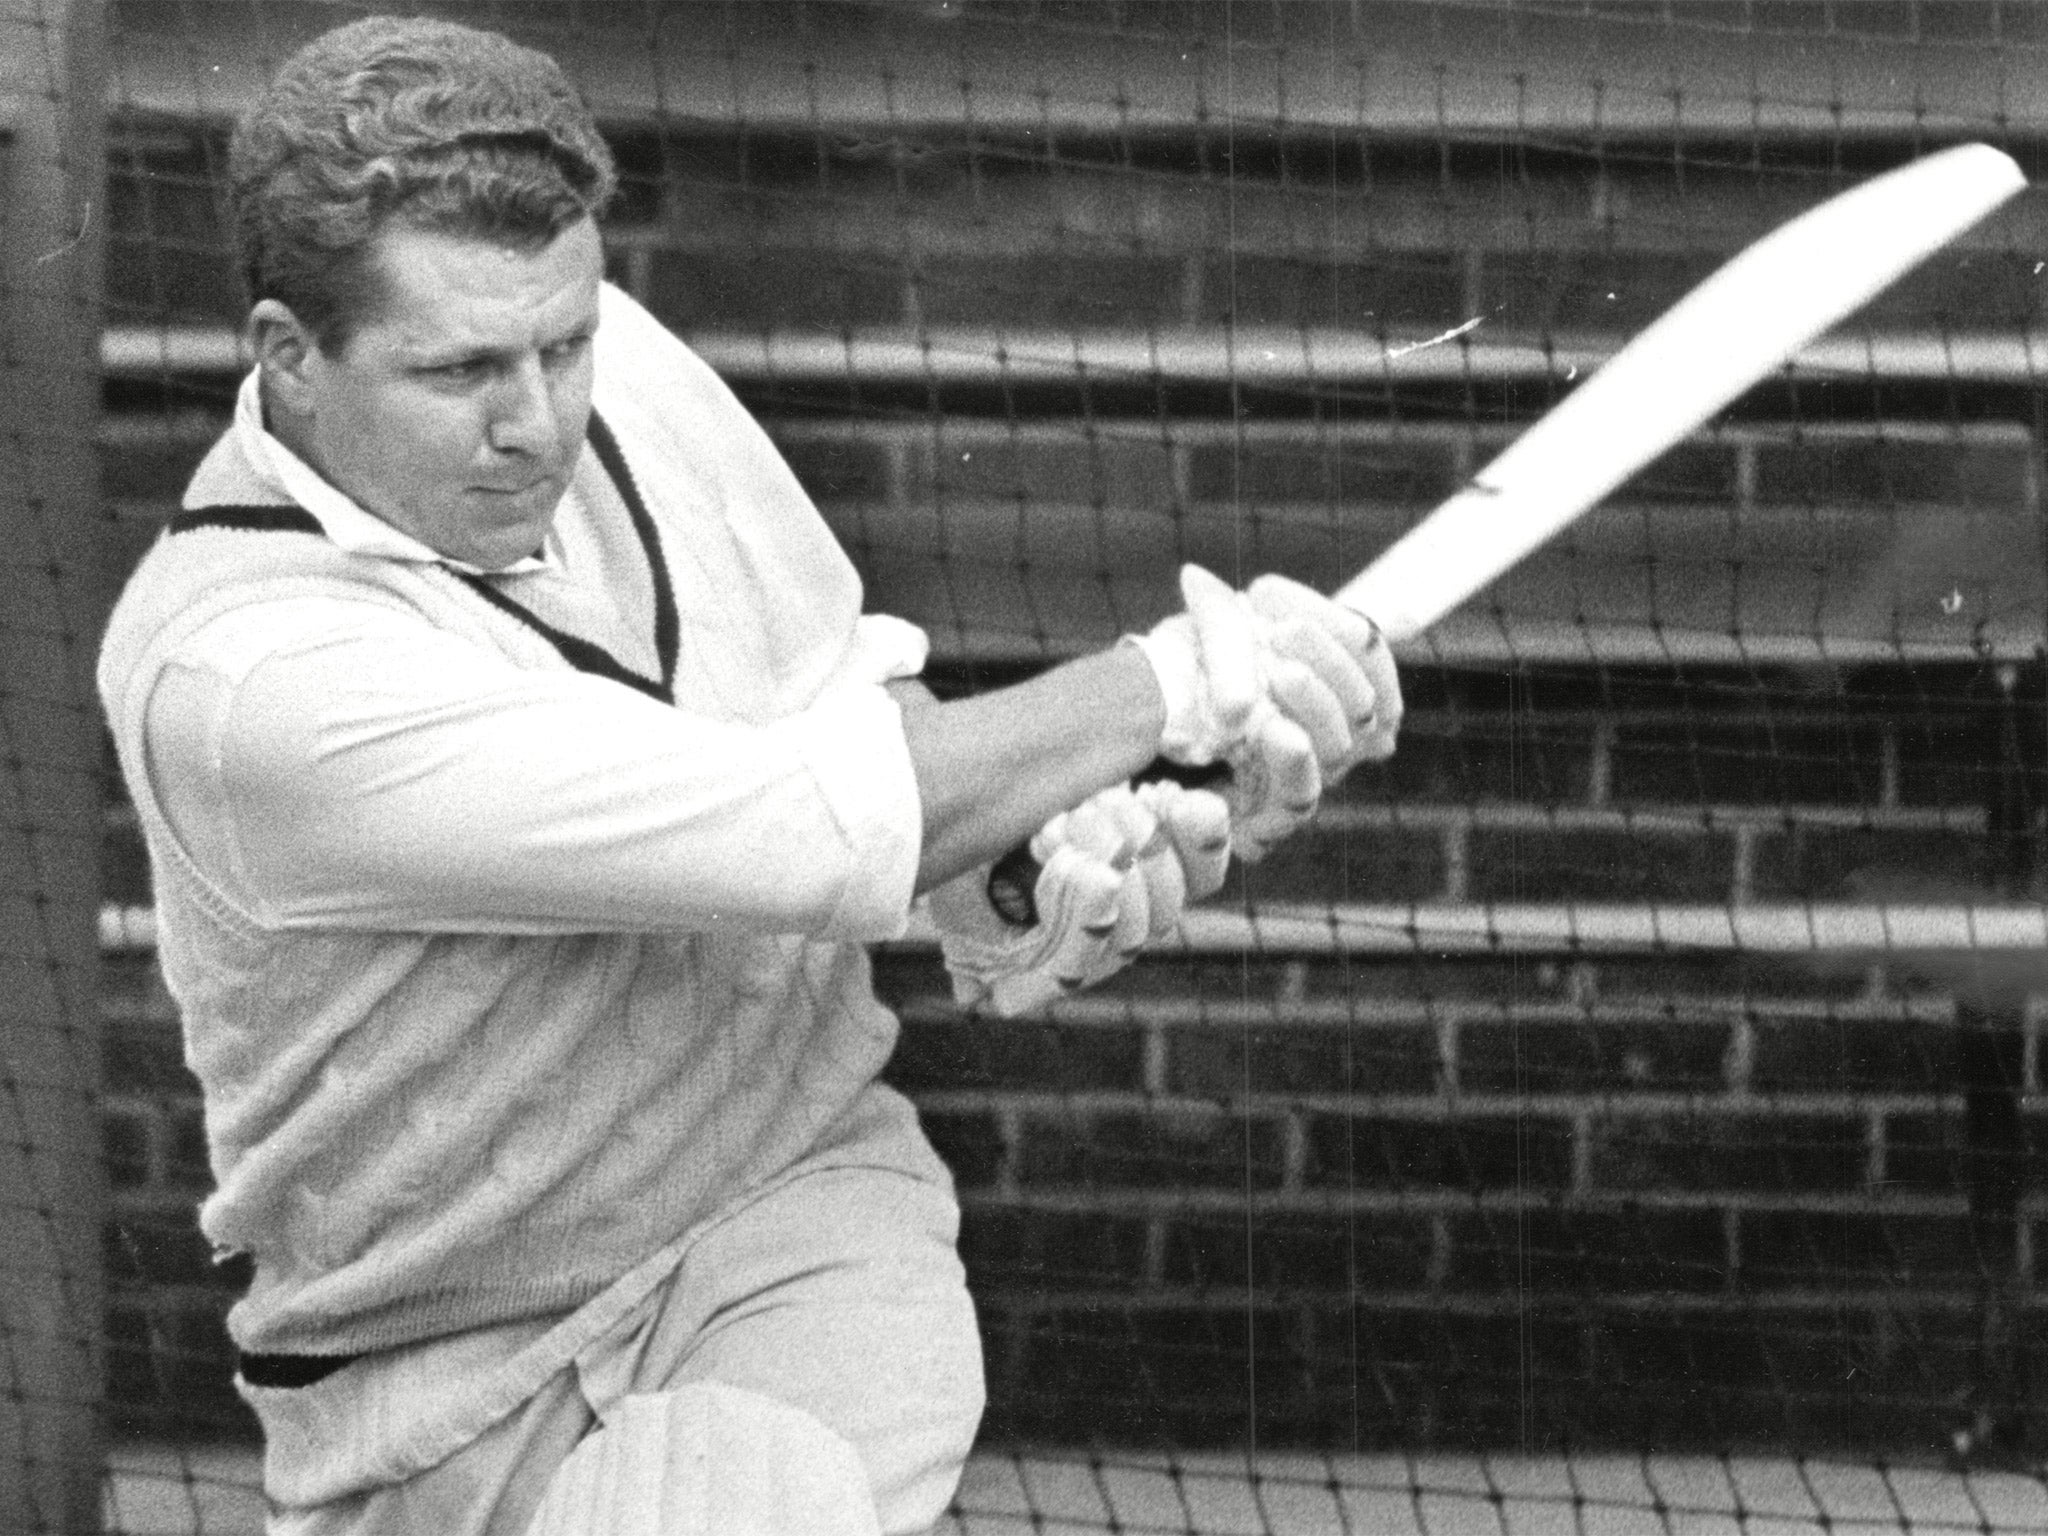 Sharpe in the nets in 1967: he scored 22,530 runs in his career